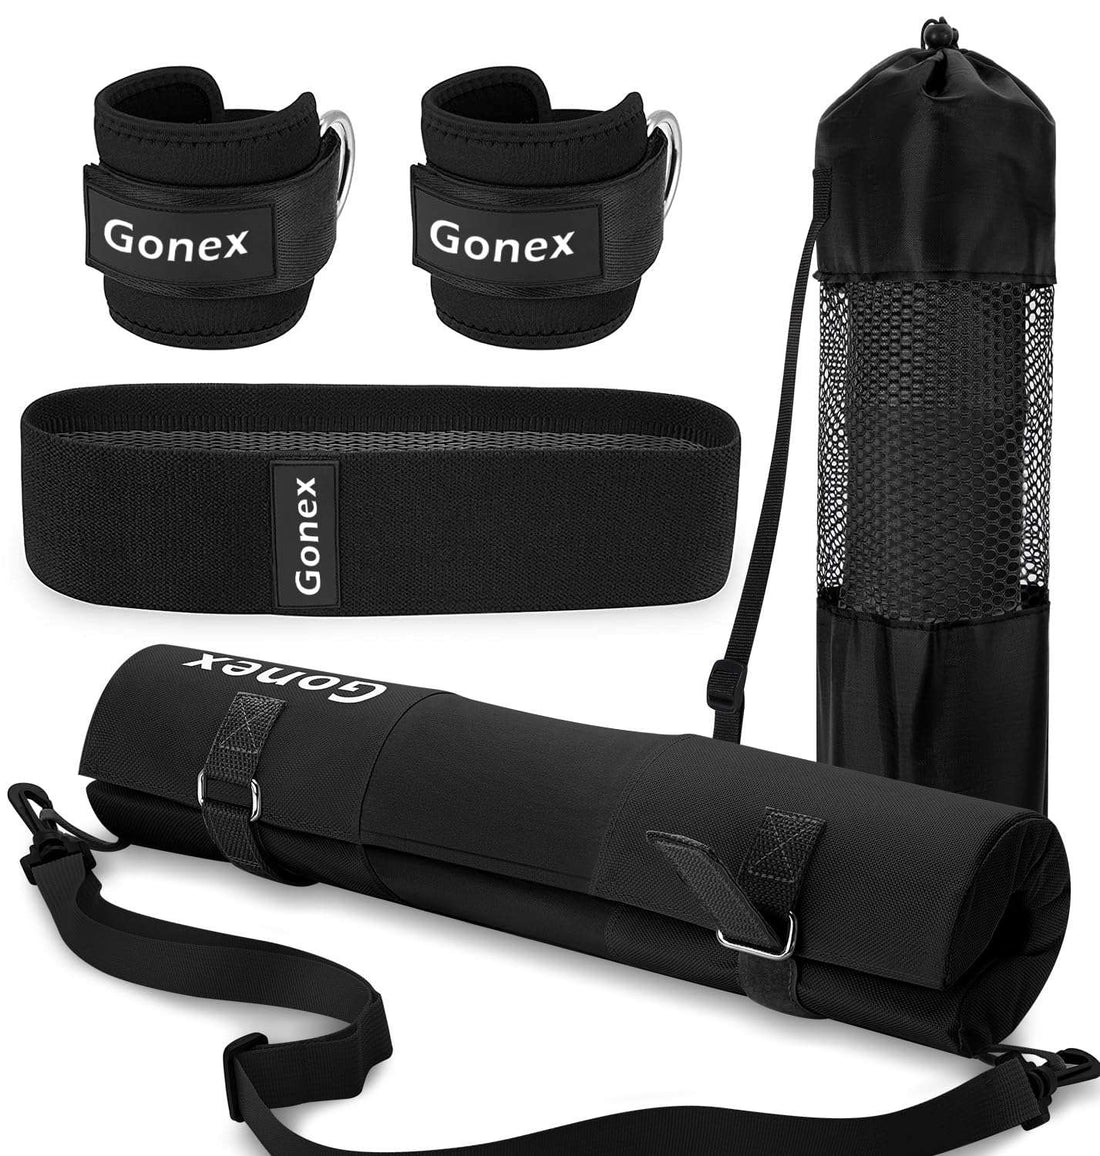 Buy Gonex Portable Home Gym Workout Equipment with 14 Exercise Accessories  Ab Roller Wheel,Elastic Resistance Bands,Push-up Stand,Post Landmine Sleeve  and More for Full Body Workouts System,Green Online at Low Prices in India 